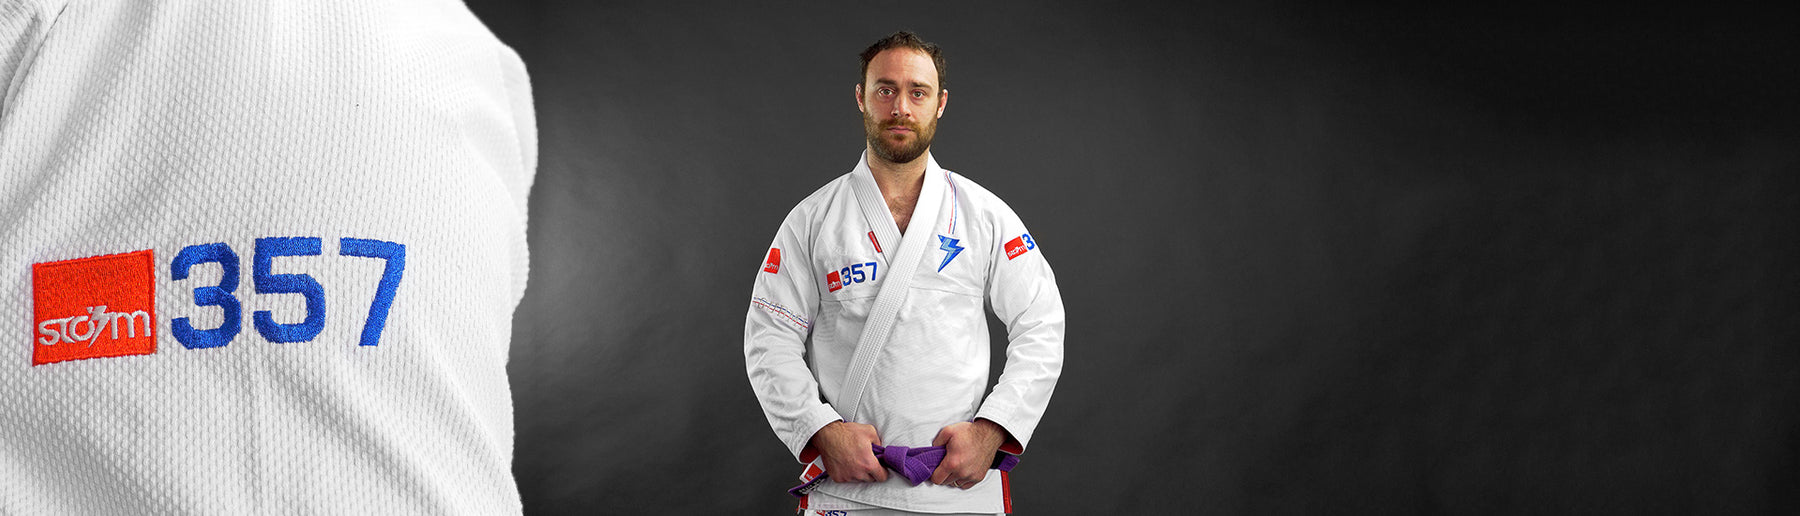 Storm Stealth T357 BJJ Gi Review